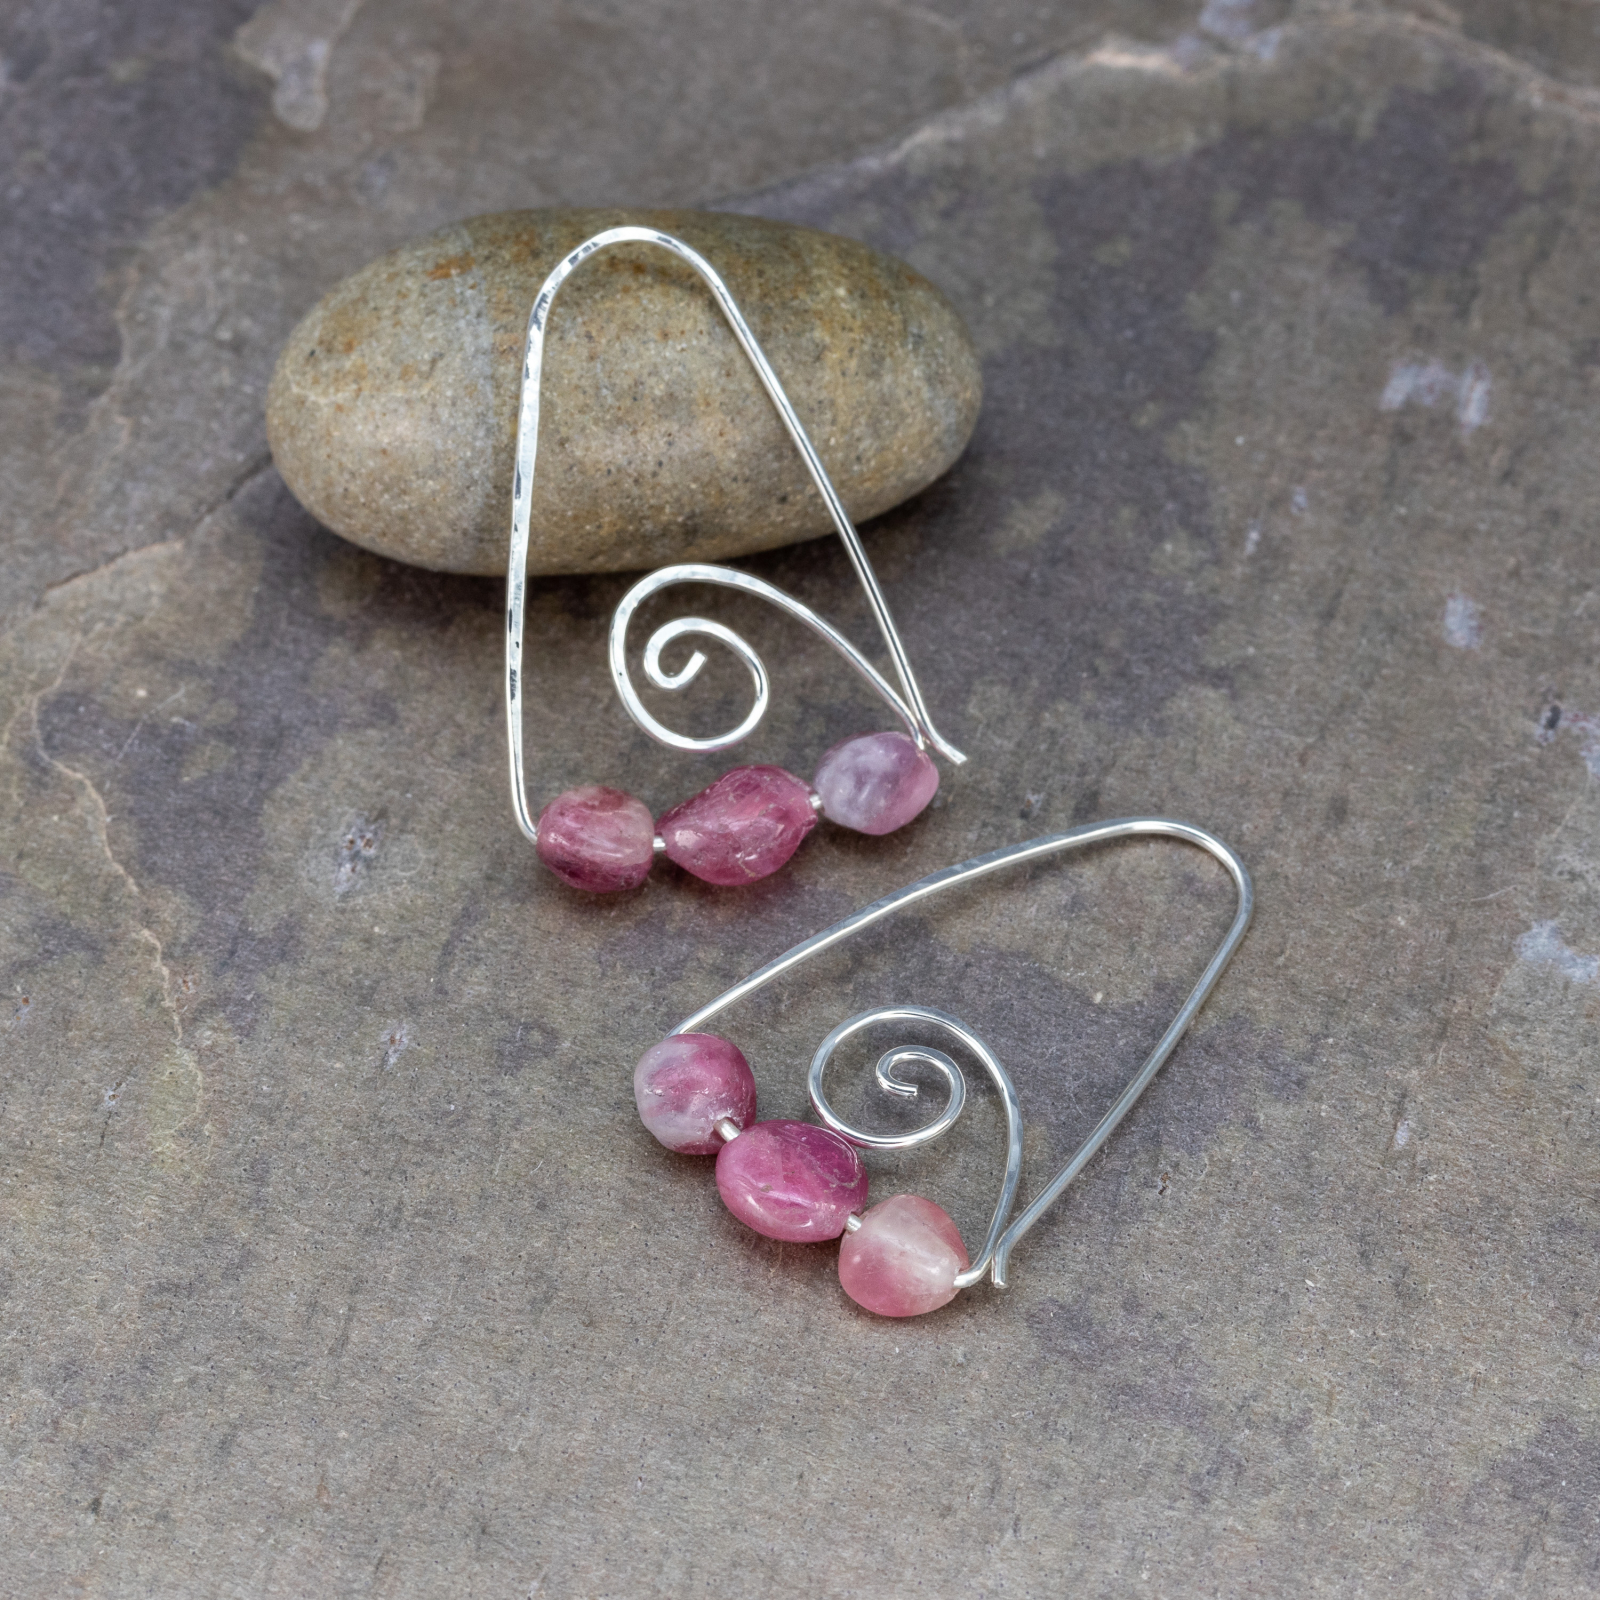 ite Gemstone Mixed Metals Dangling Earrings on Sterling Silver Wires Artisan Jewelry 